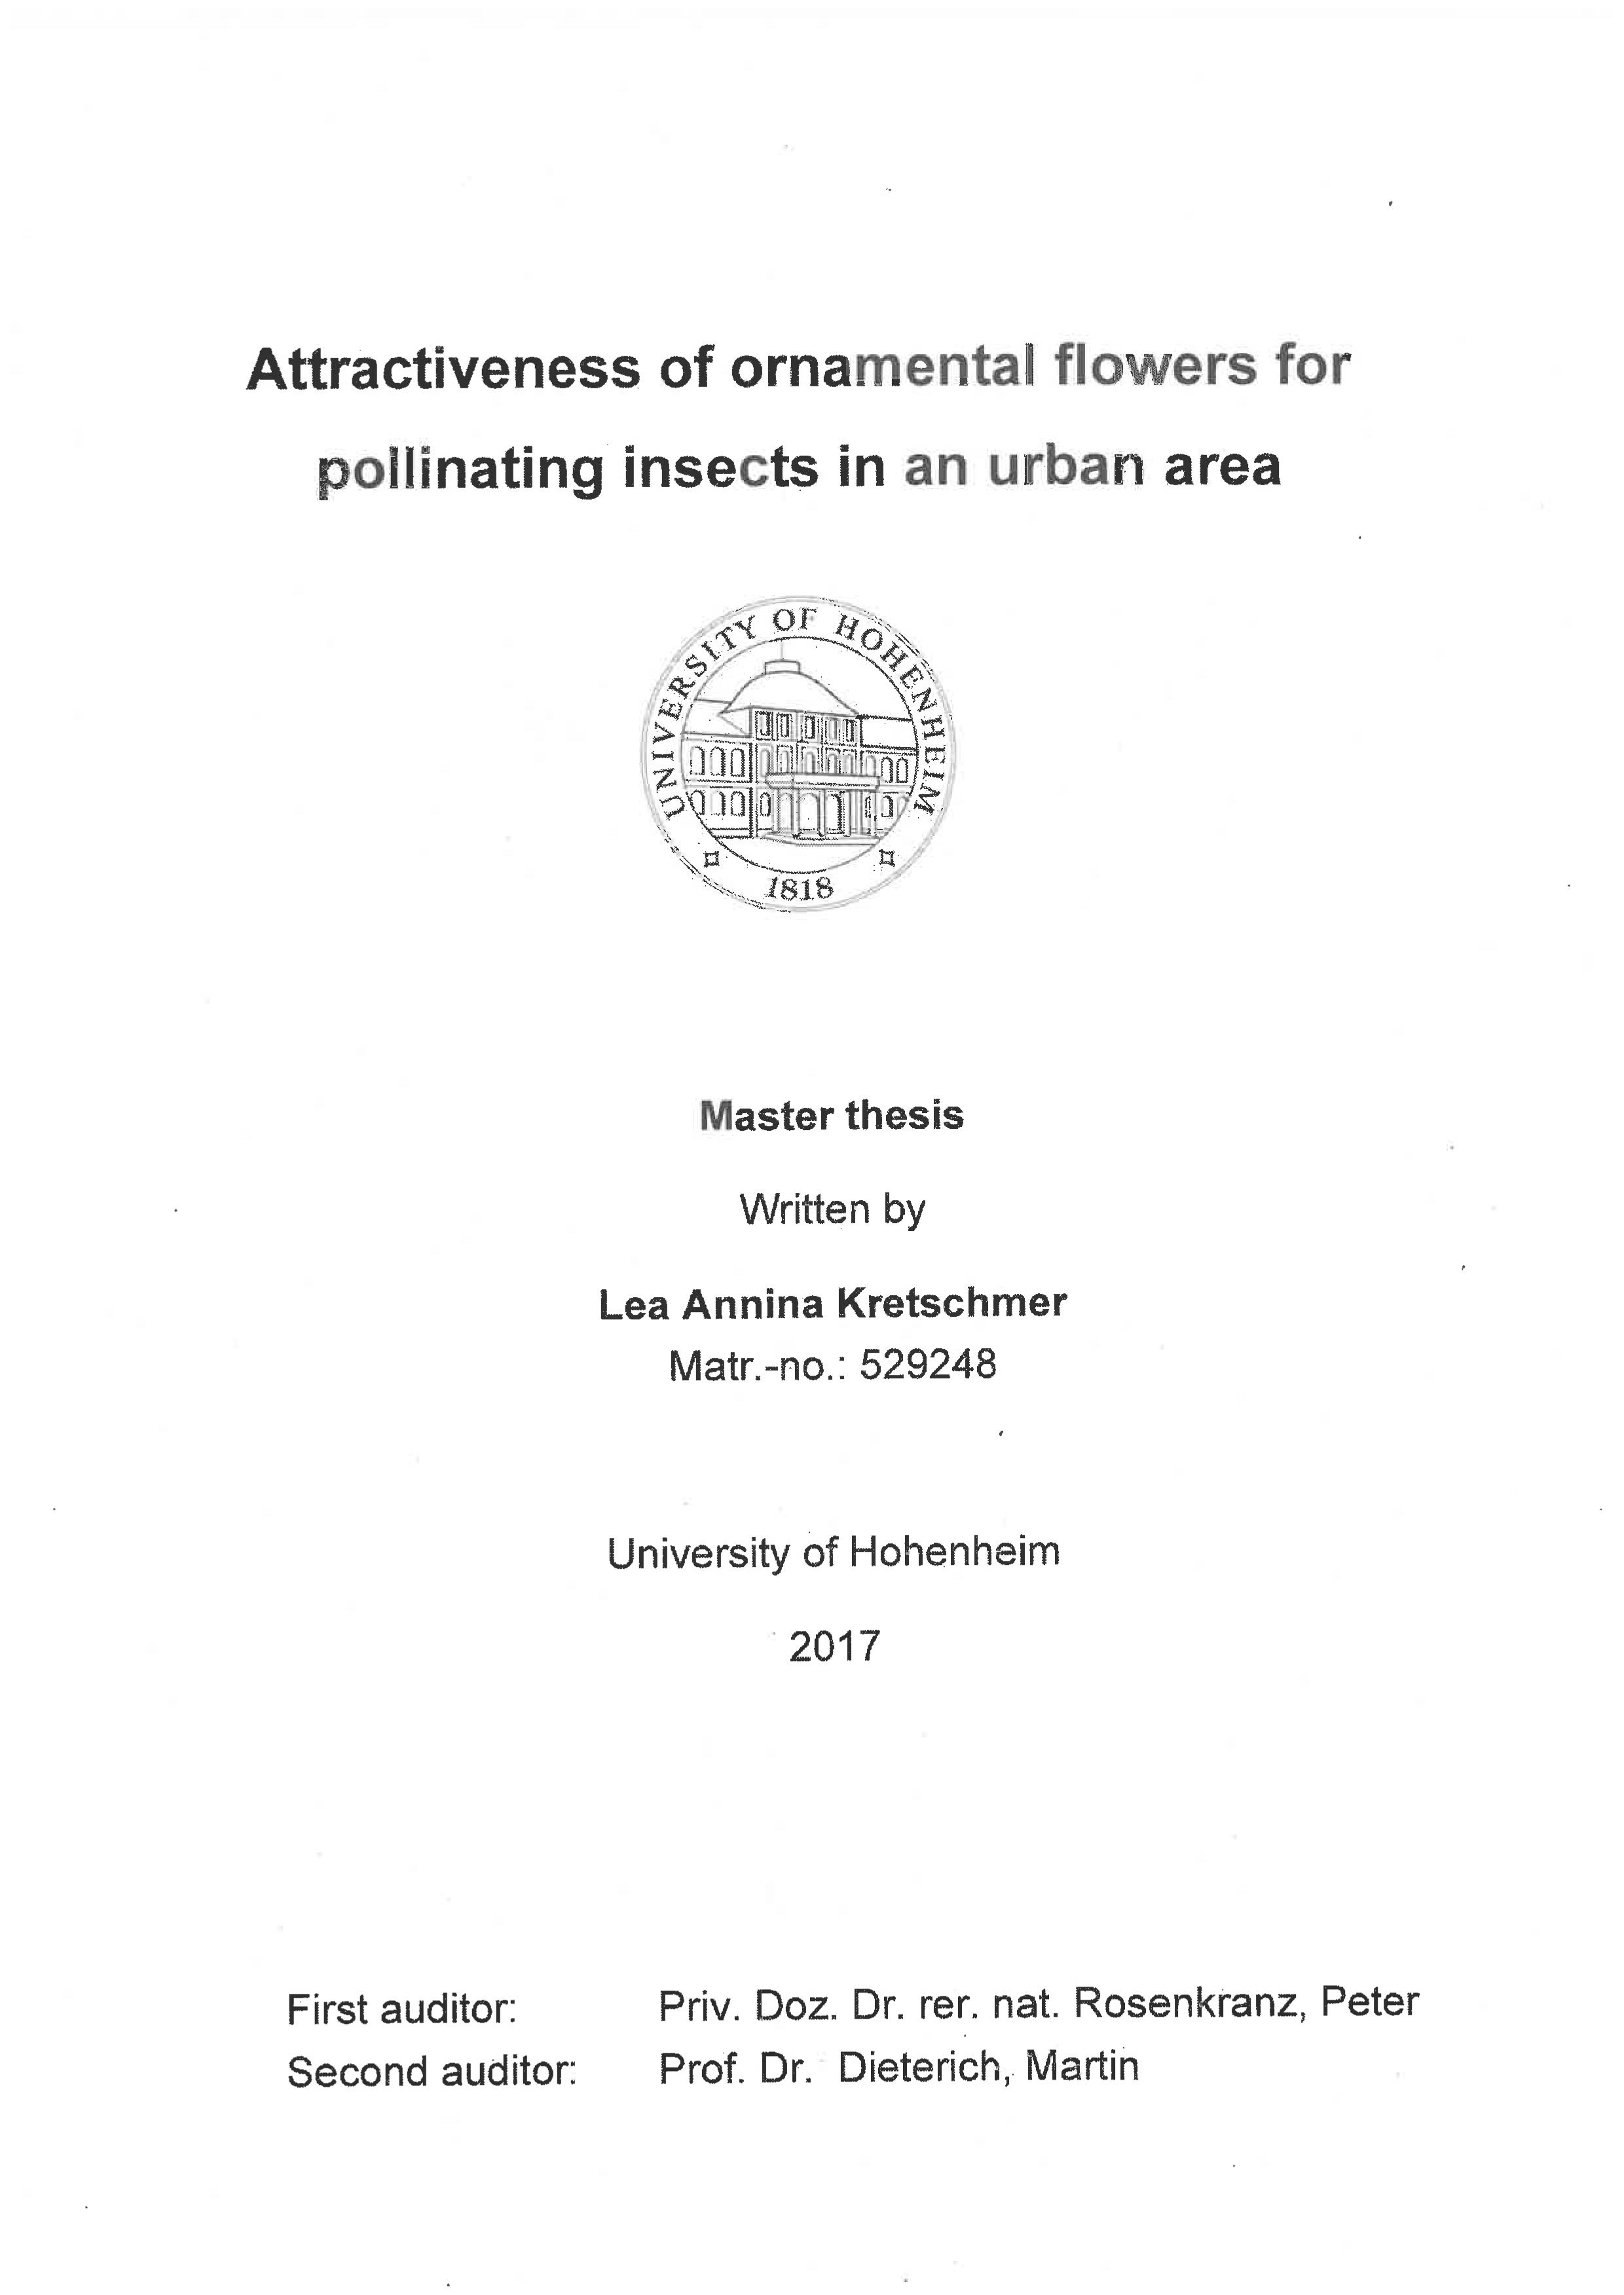 Attractiveness of ornamental flowers for pollinating insects in an urban area. Master thesis University of Hohenheim